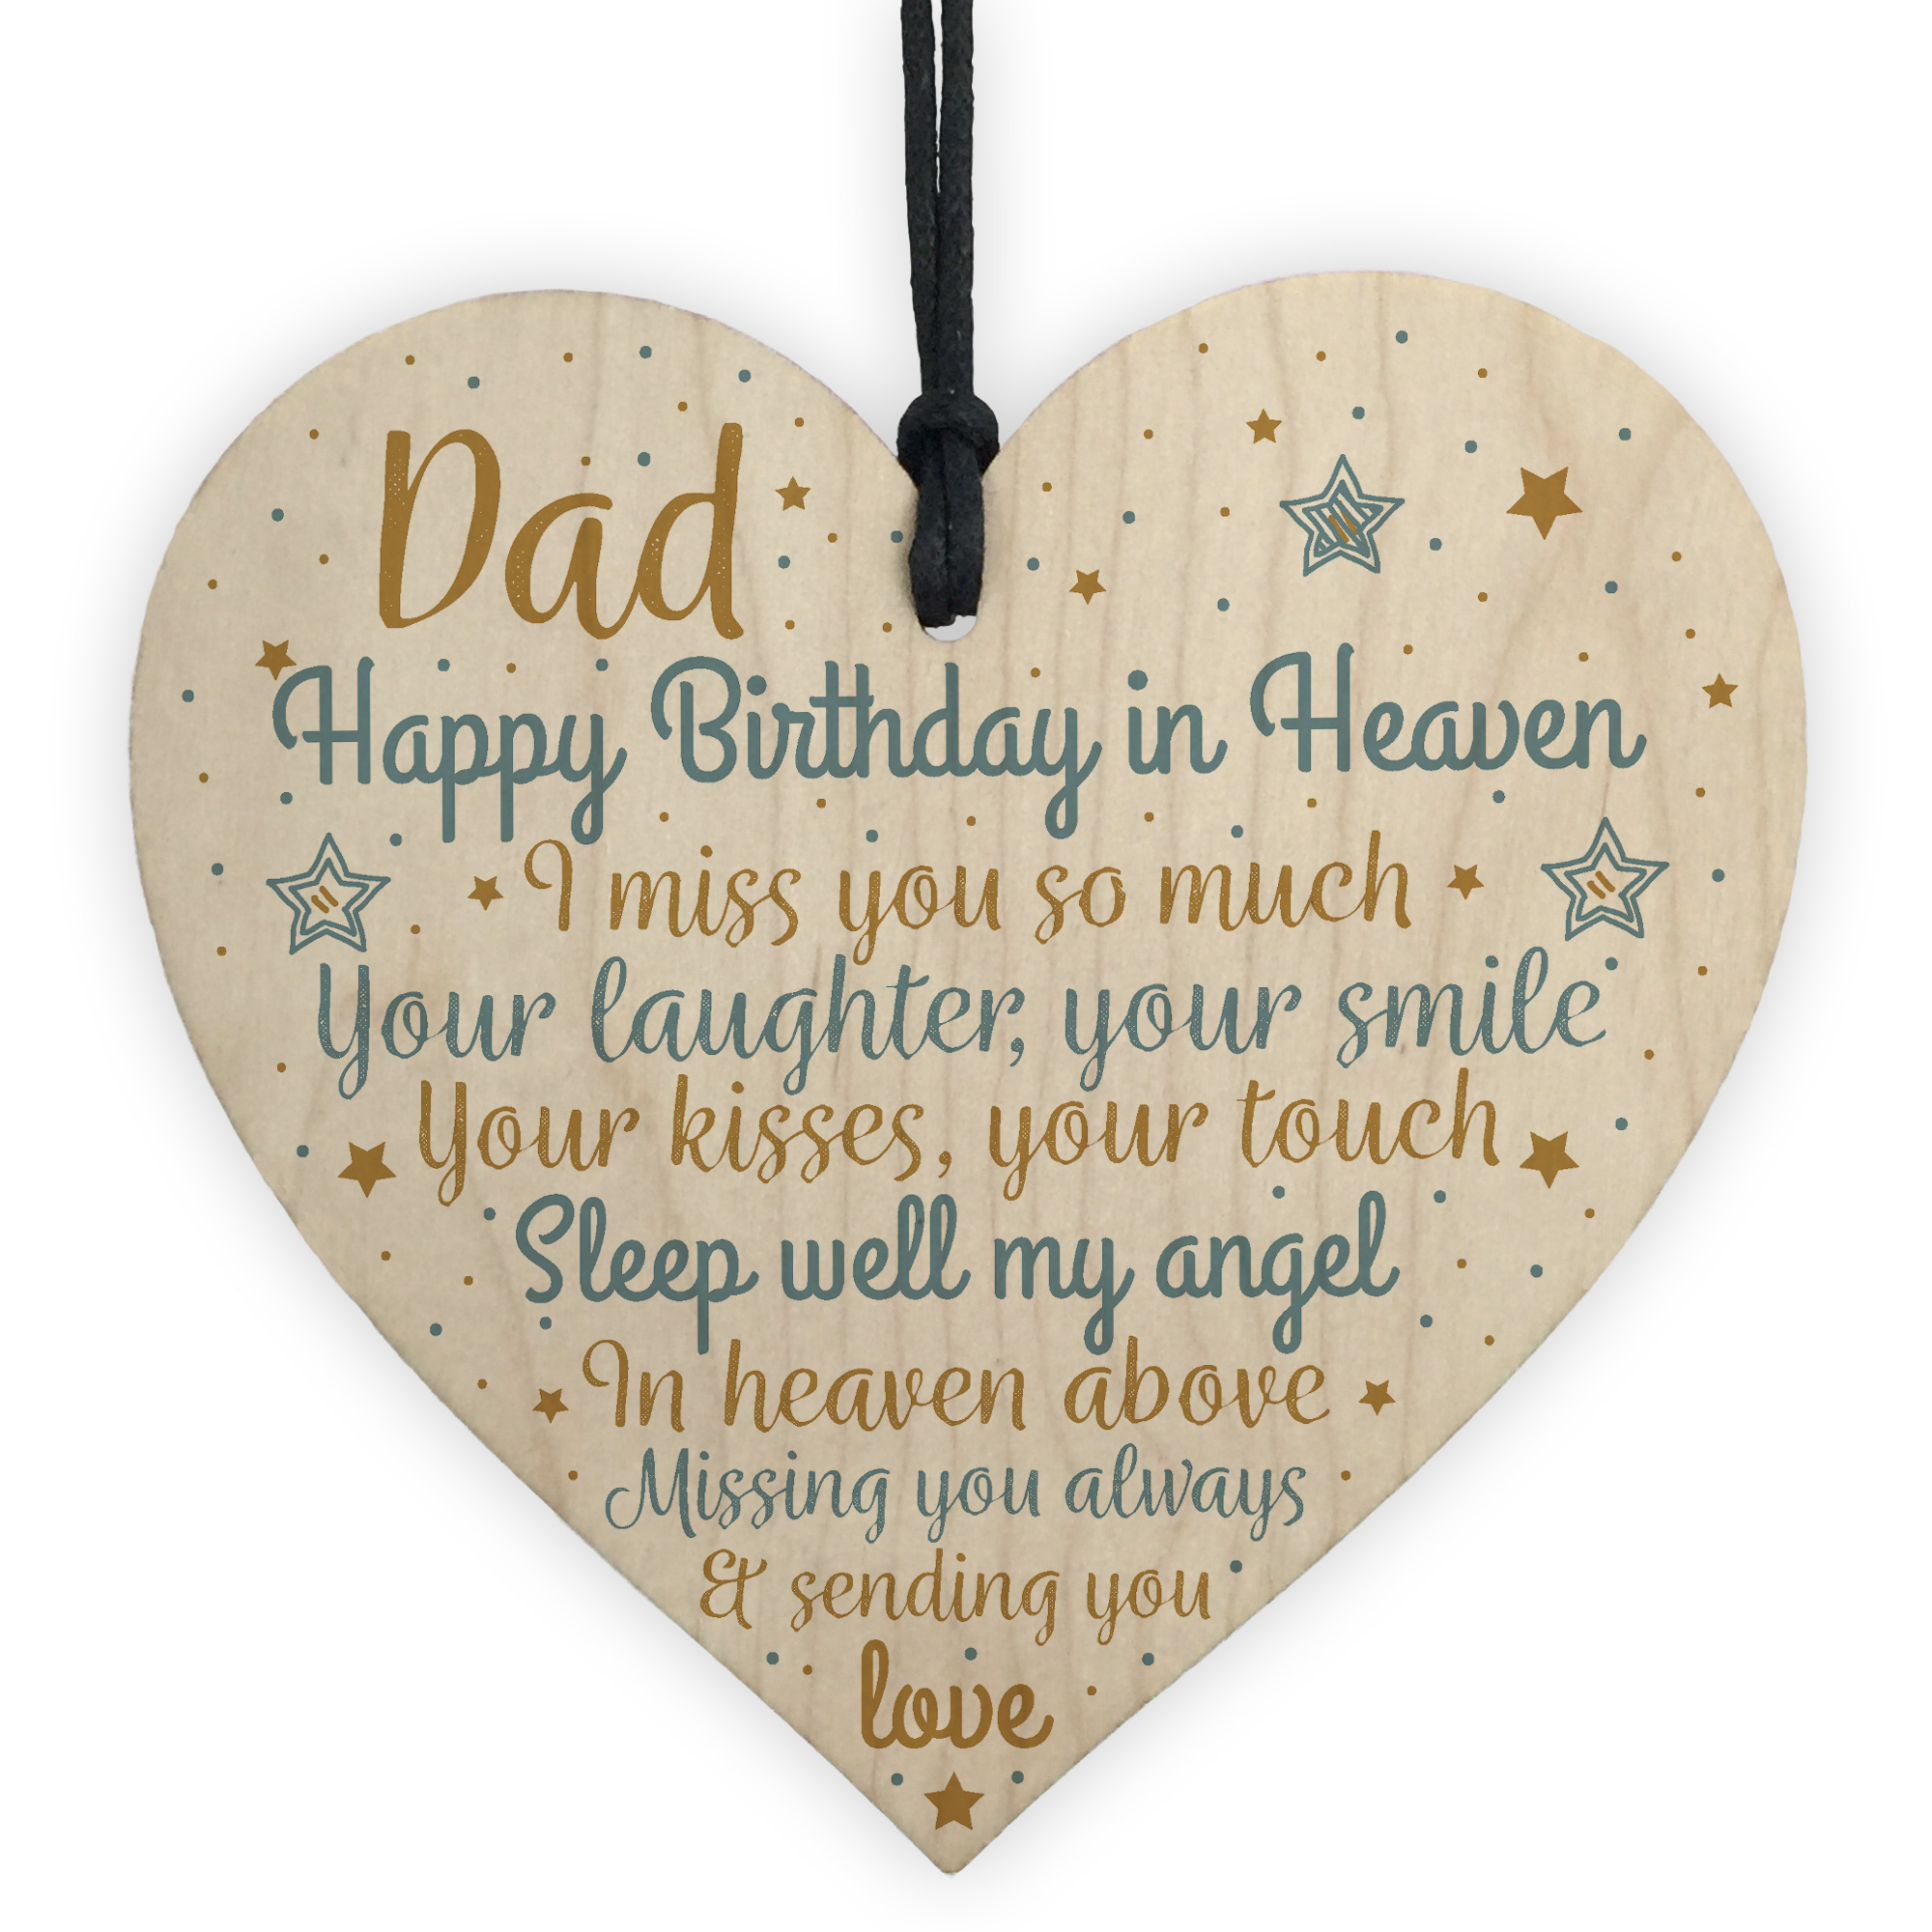 in memory of dad gifts